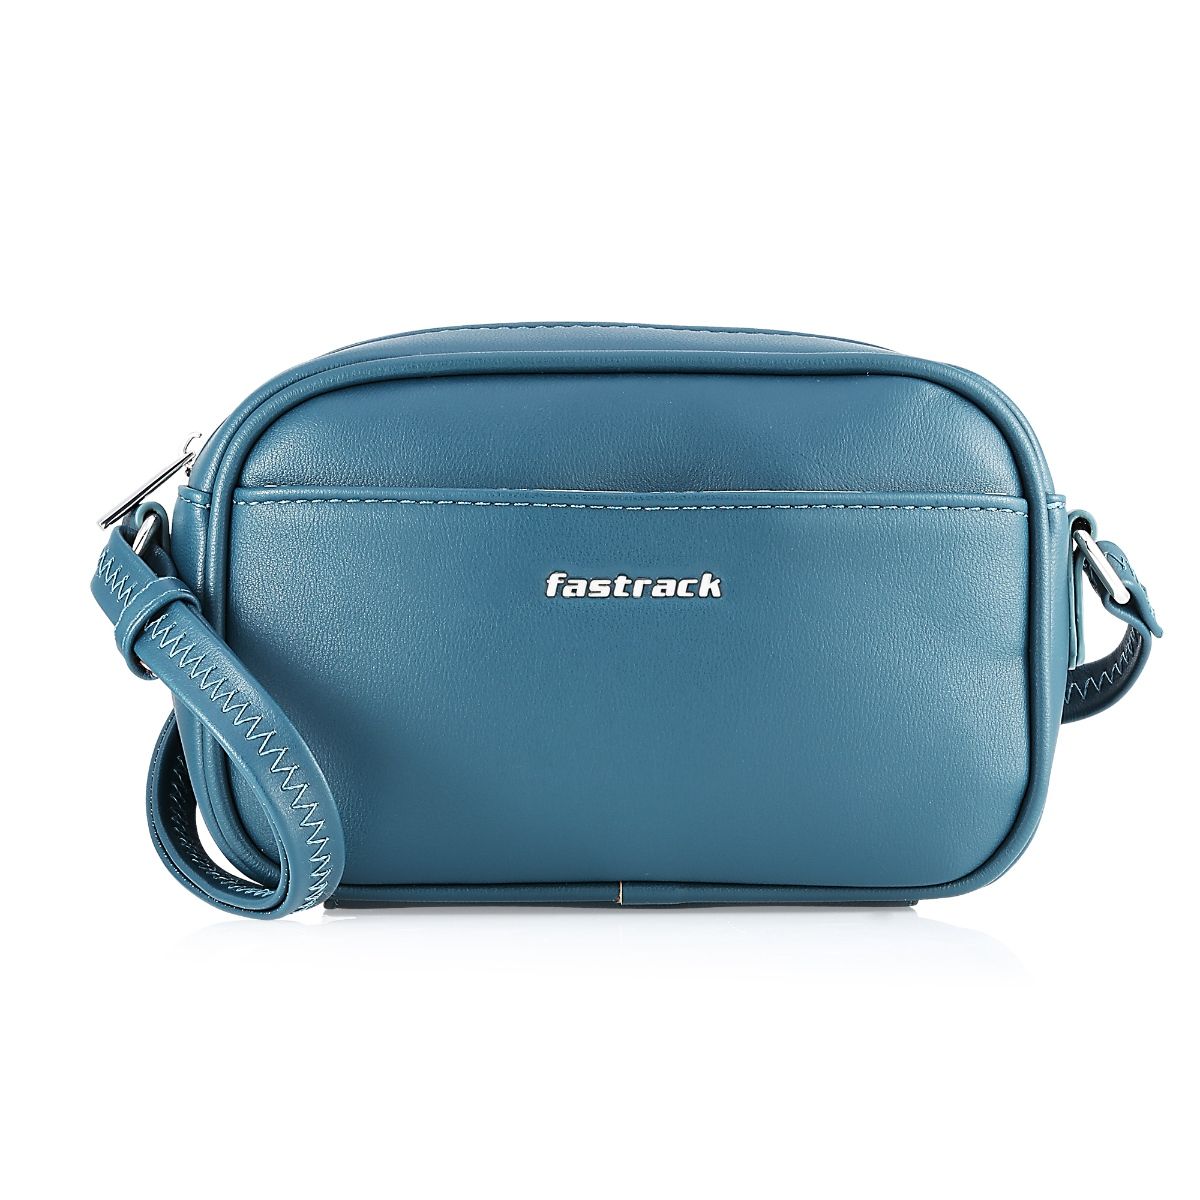 Buy Latest Bags Online for Him and Her | Fastrack | Latest bags, Online bags,  Bags